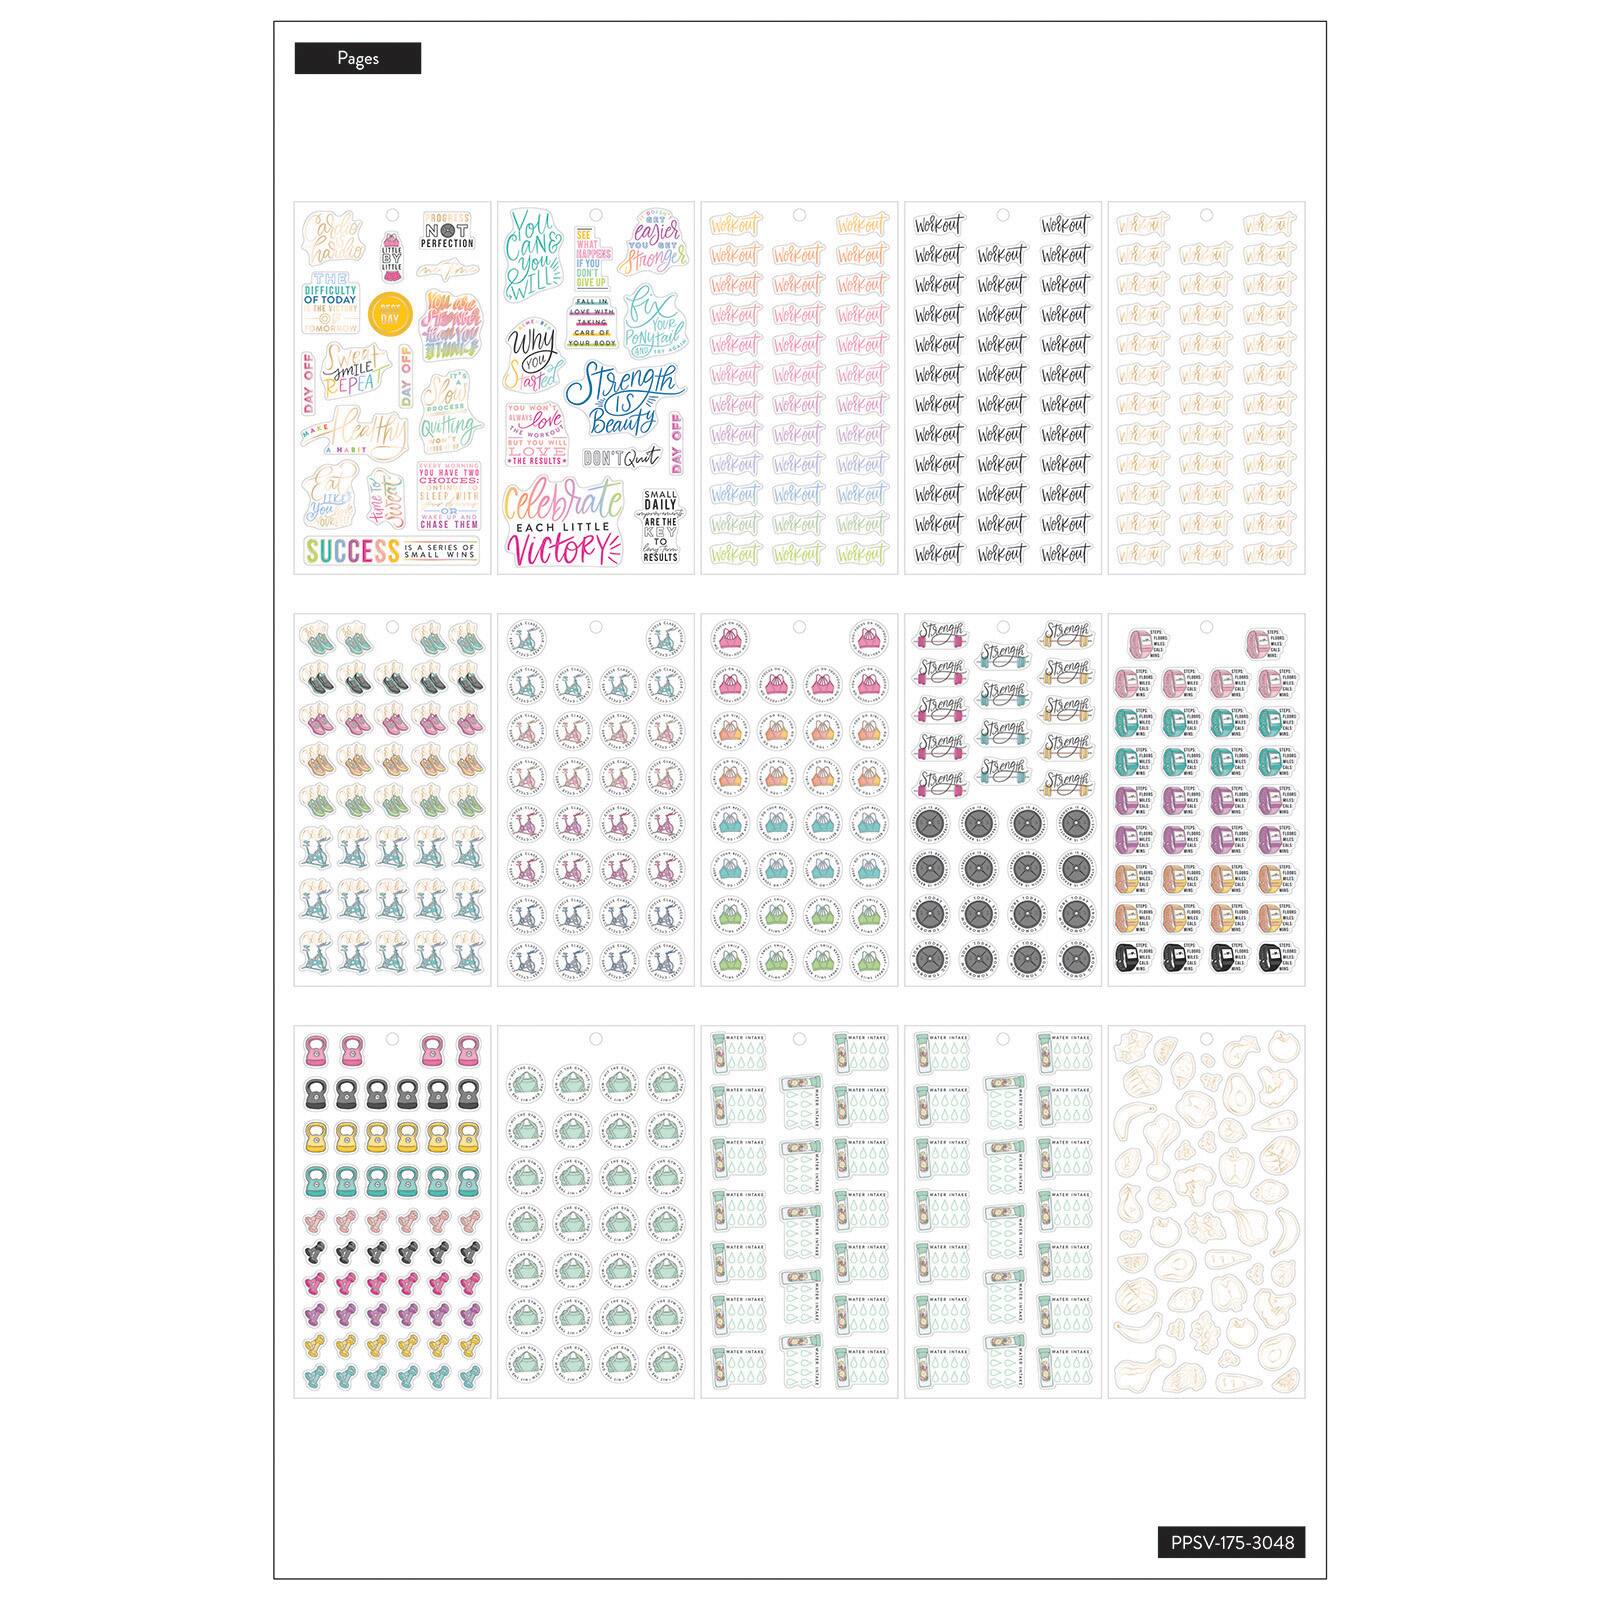 Mermaid Sticker Kit Happy Planner Fitness Expansion Pack